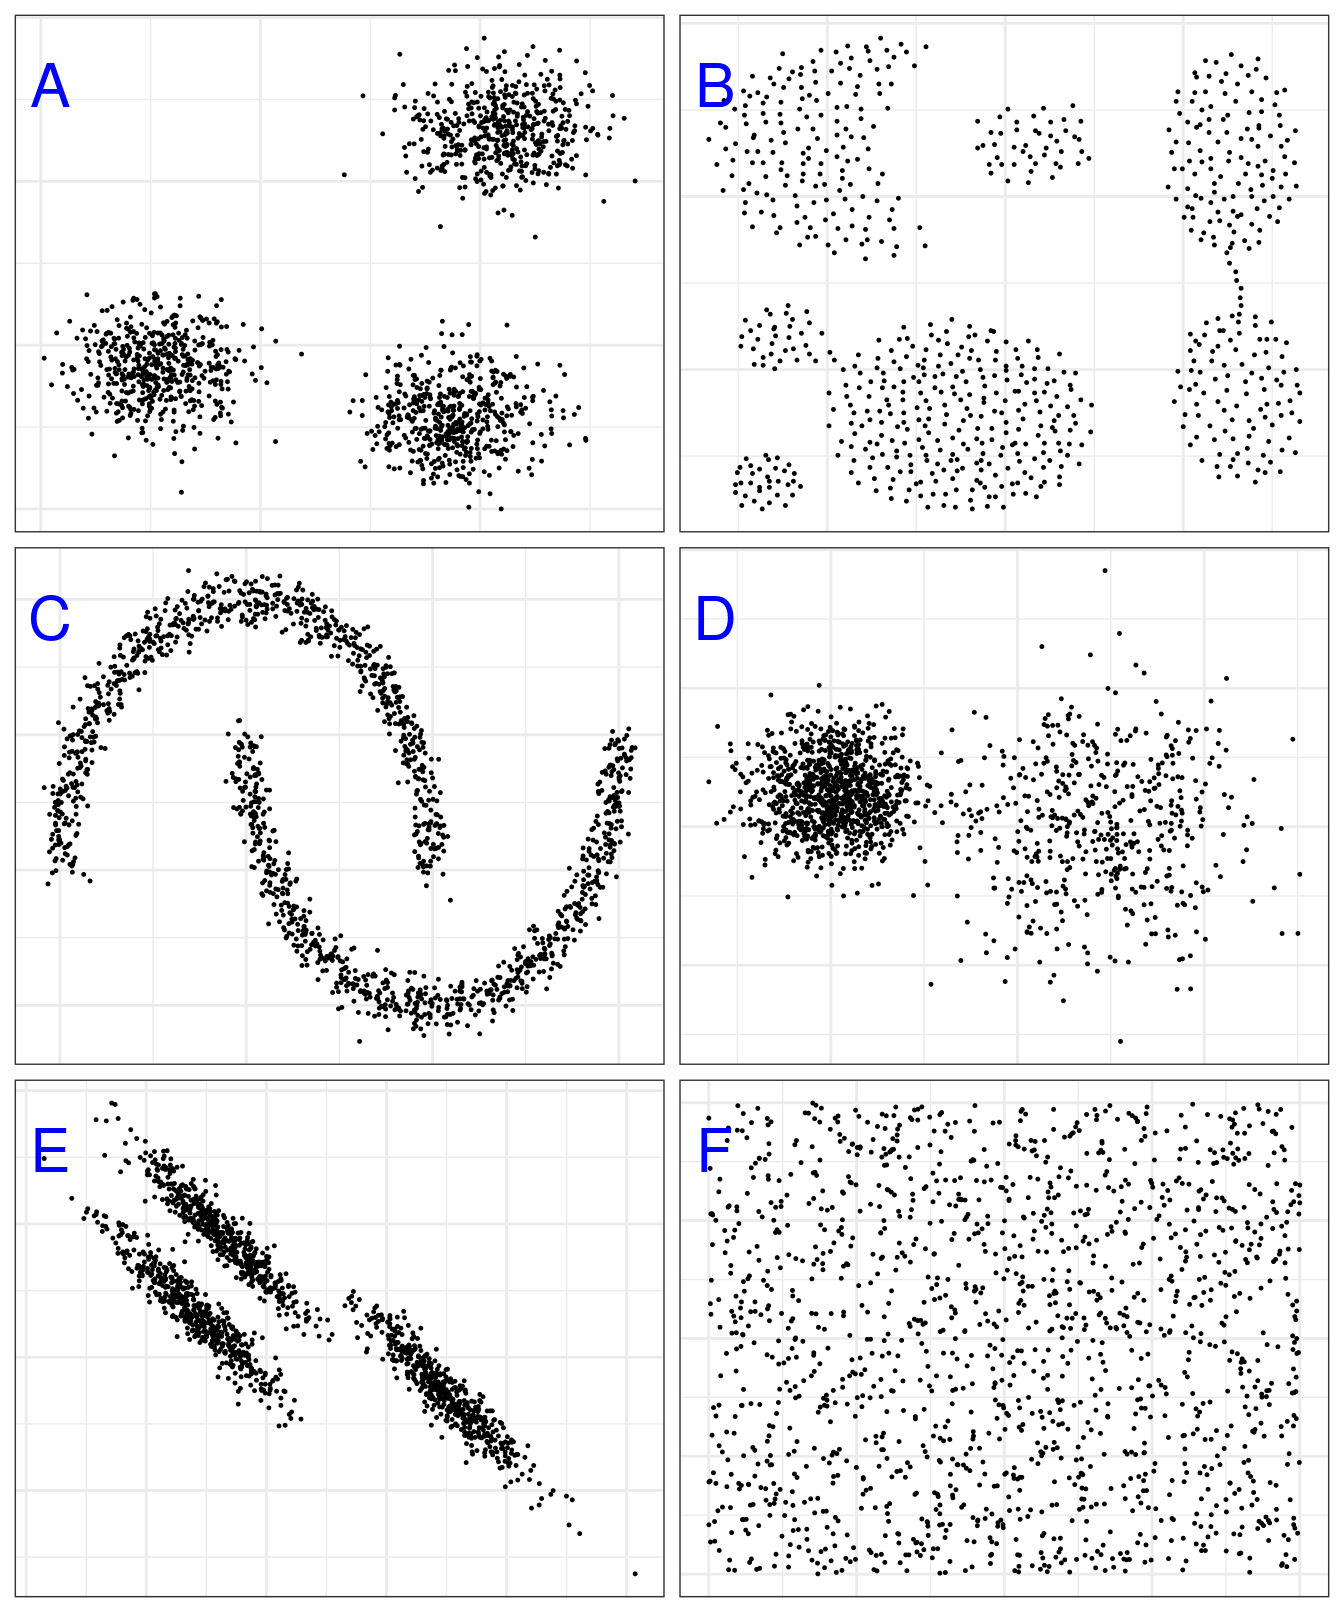 Example clusters. **A**, *blobs*; **B**, *aggregation*; **C**, *noisy moons*; **D**, *different density*; **E**, *anisotropic distributions*; **F**, *no structure*.